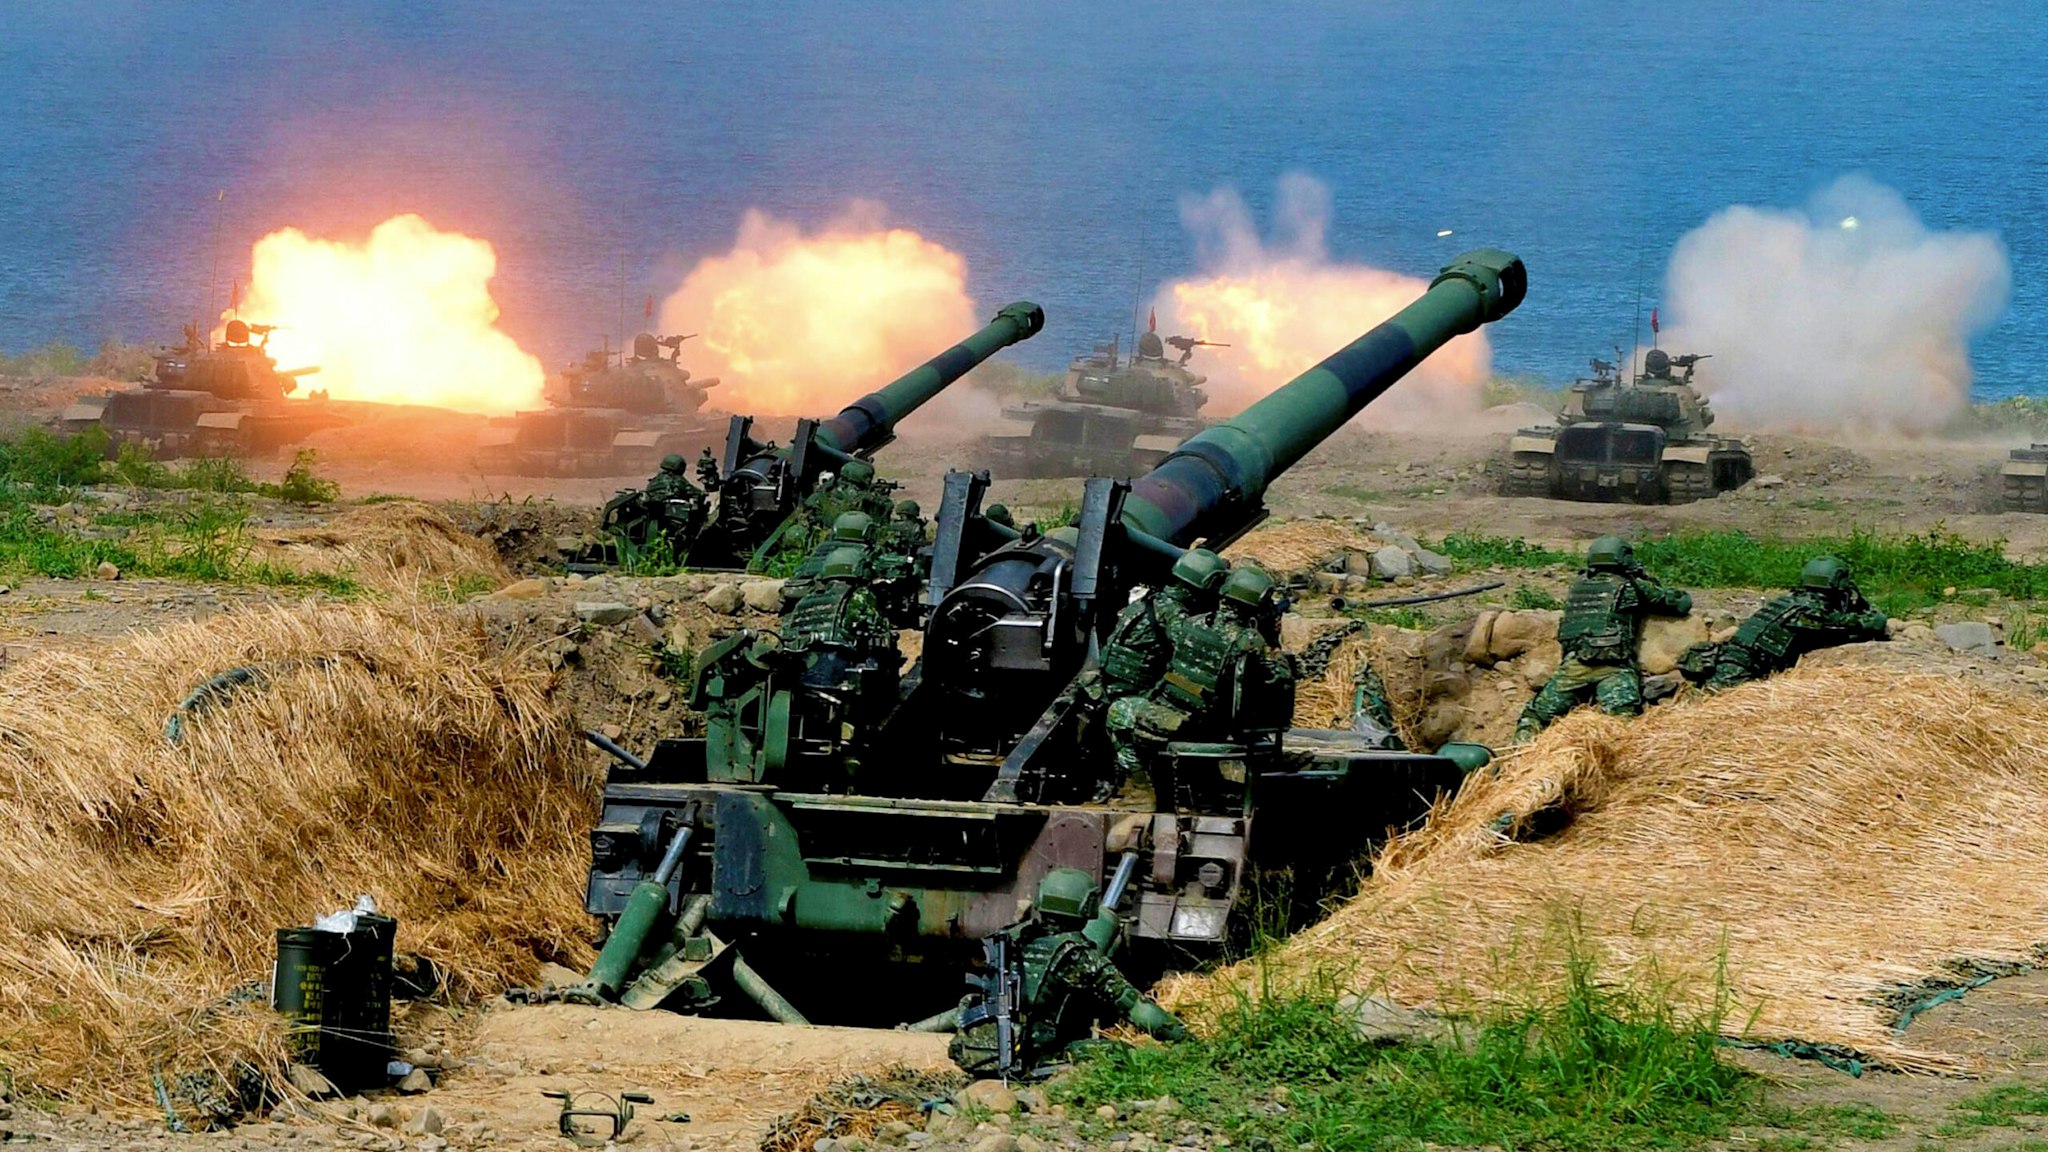 US-made CM-11 tanks (in background) are fired in front of two 8-inch self-propelled artillery guns during the 35th "Han Kuang" (Han Glory) military drill in southern Taiwan's Pingtung county on May 30, 2019. - The manoeuvres in Taiwan come after the US, Japan, South Korea and Australia kicked off operation "Pacific Vanguard" near Guam, bringing together more than 3,000 sailors from the four countries last week.